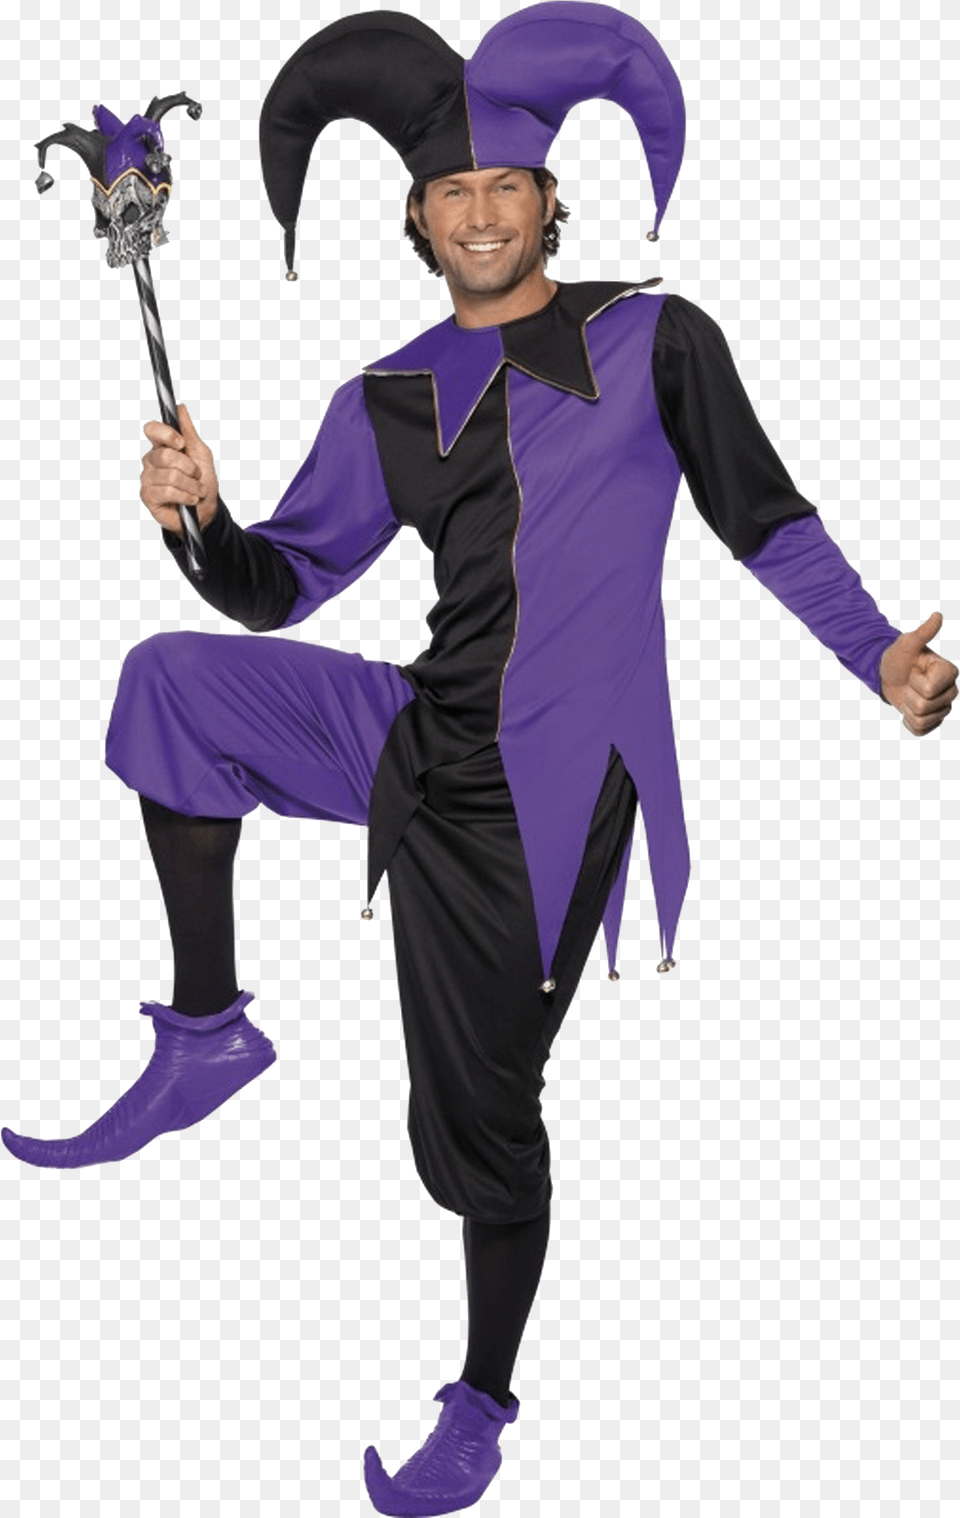 Black And Purple Jester Hat, Clothing, Costume, Person, Adult Png Image